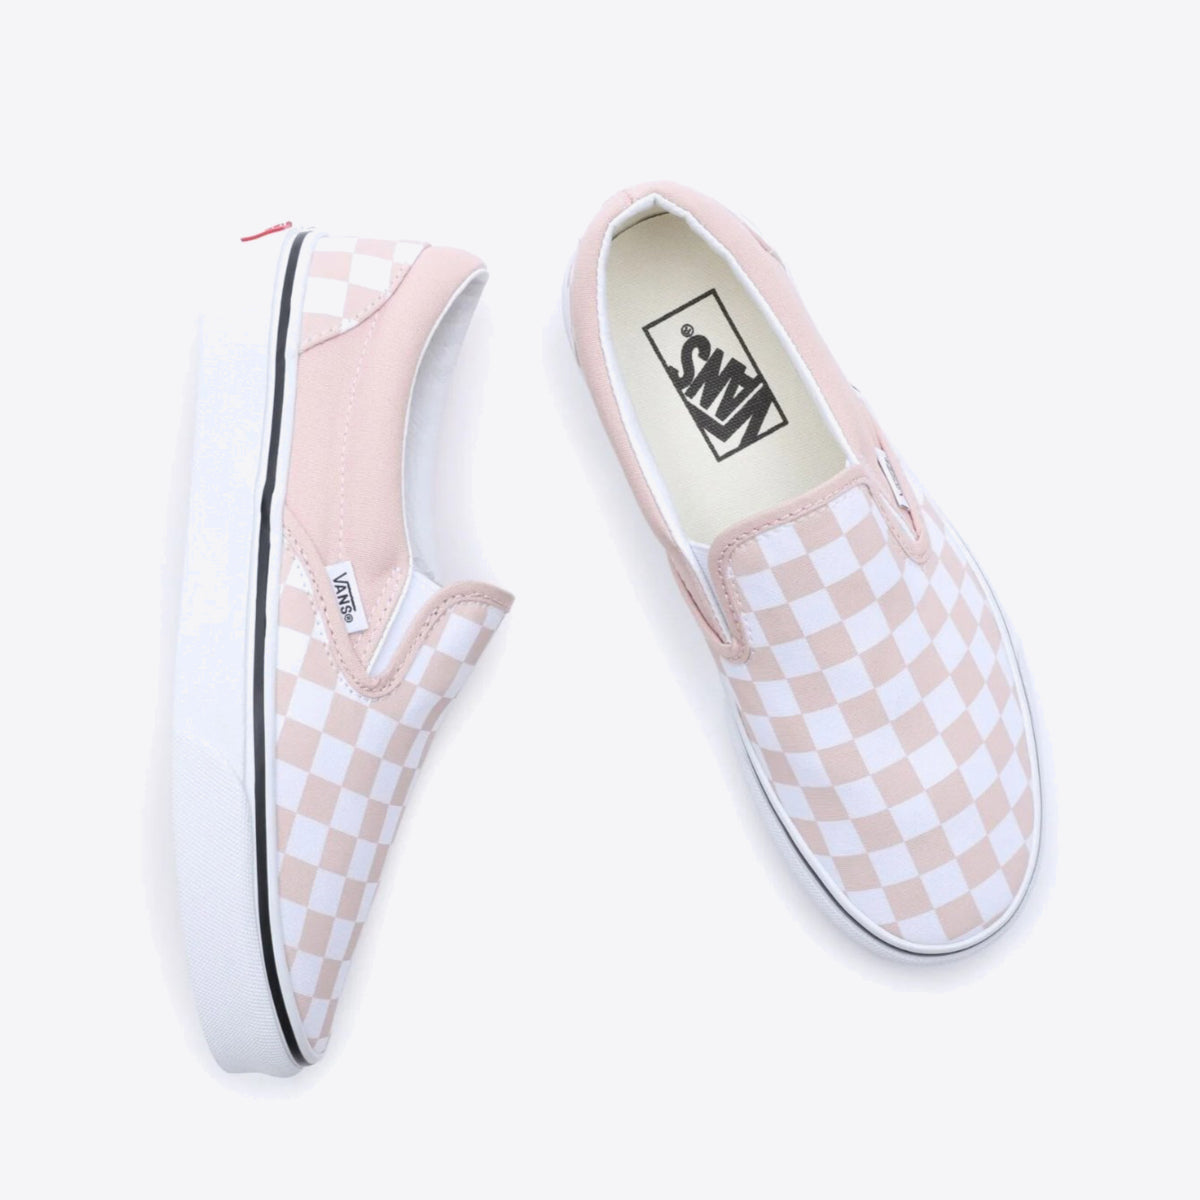 VANS Classic Slip-On Color Theory Checkerboard - Women's Rose Smoke - Image 6